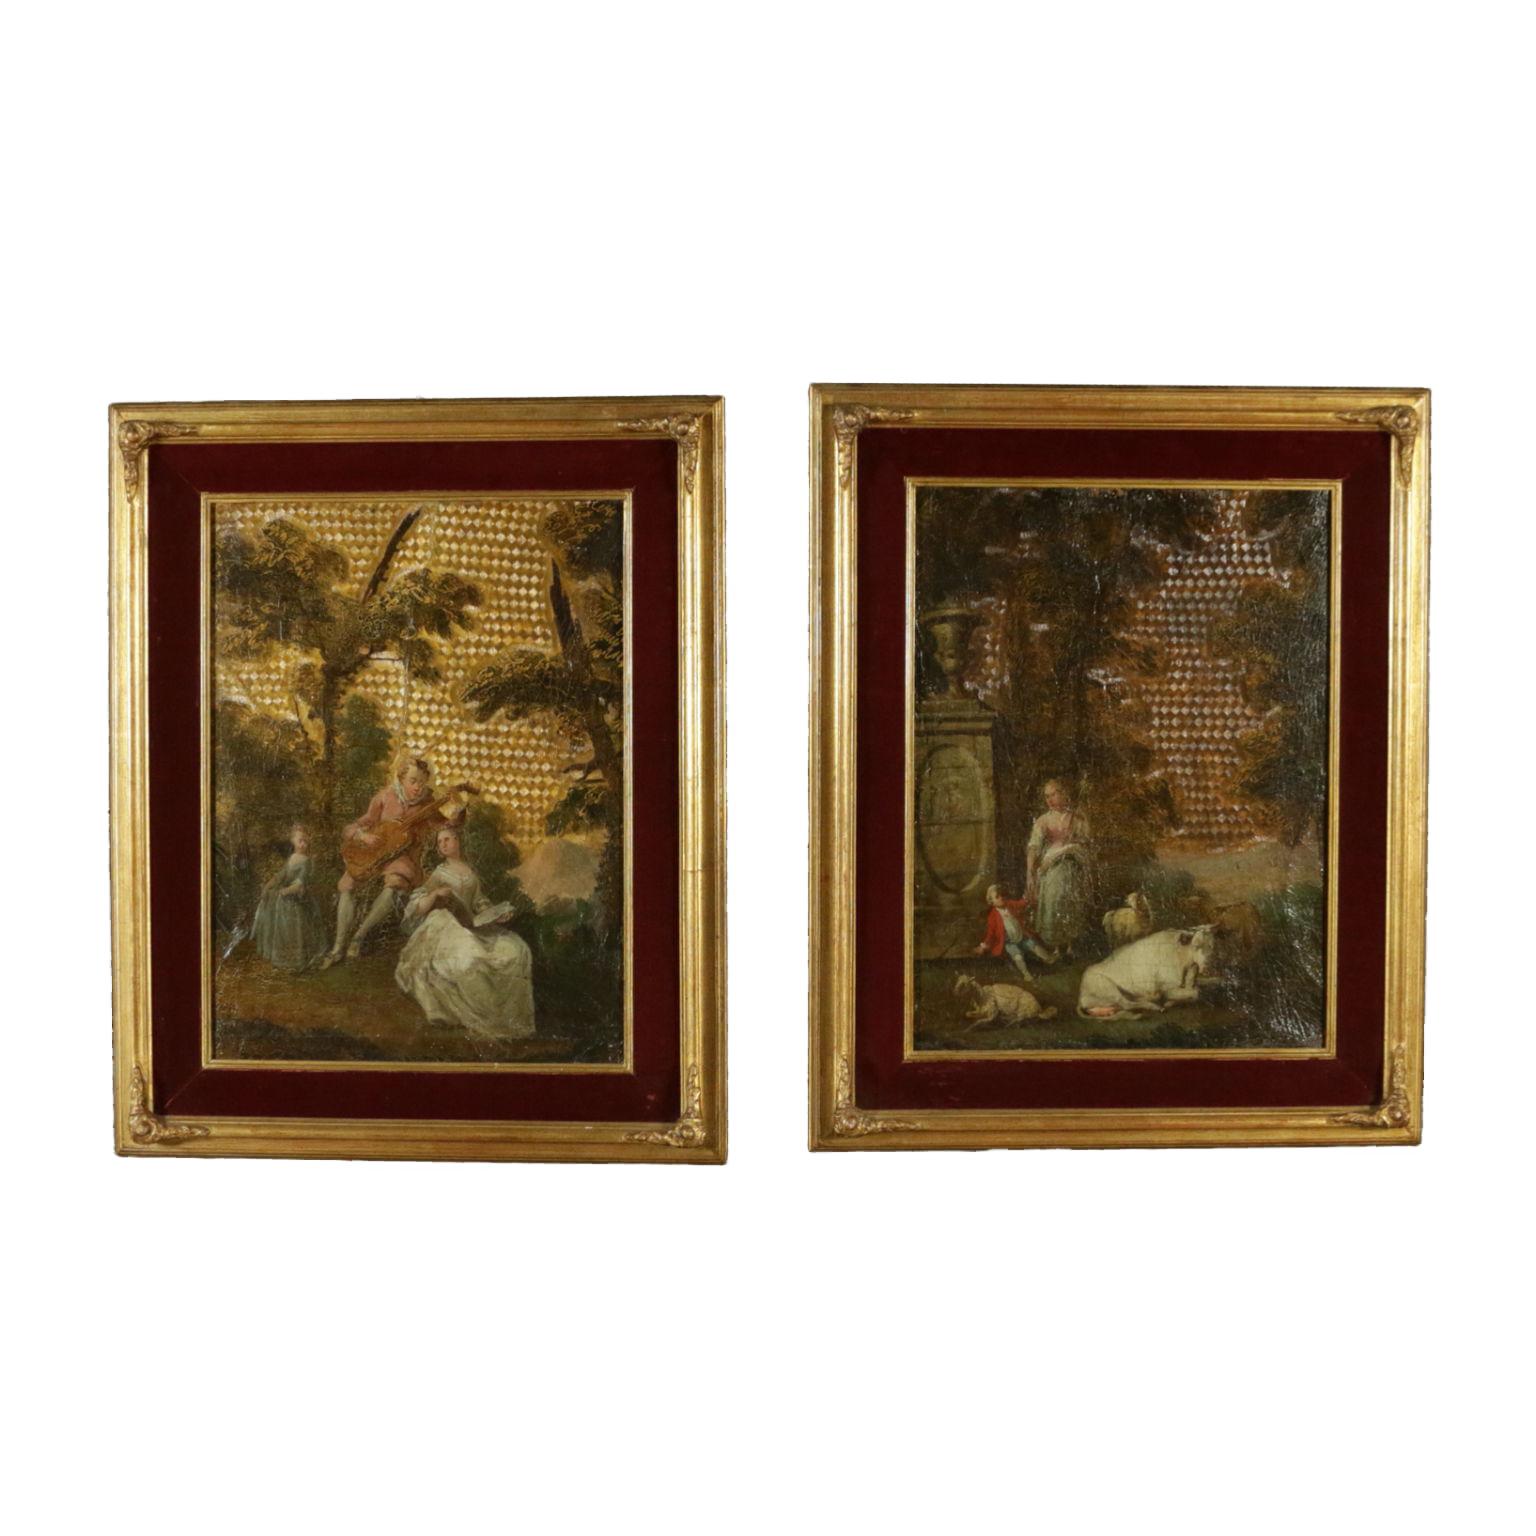 Unknown Figurative Painting - Matching Paintings on Leather 18th Century, Gallant Scene and Bucolic Scene 